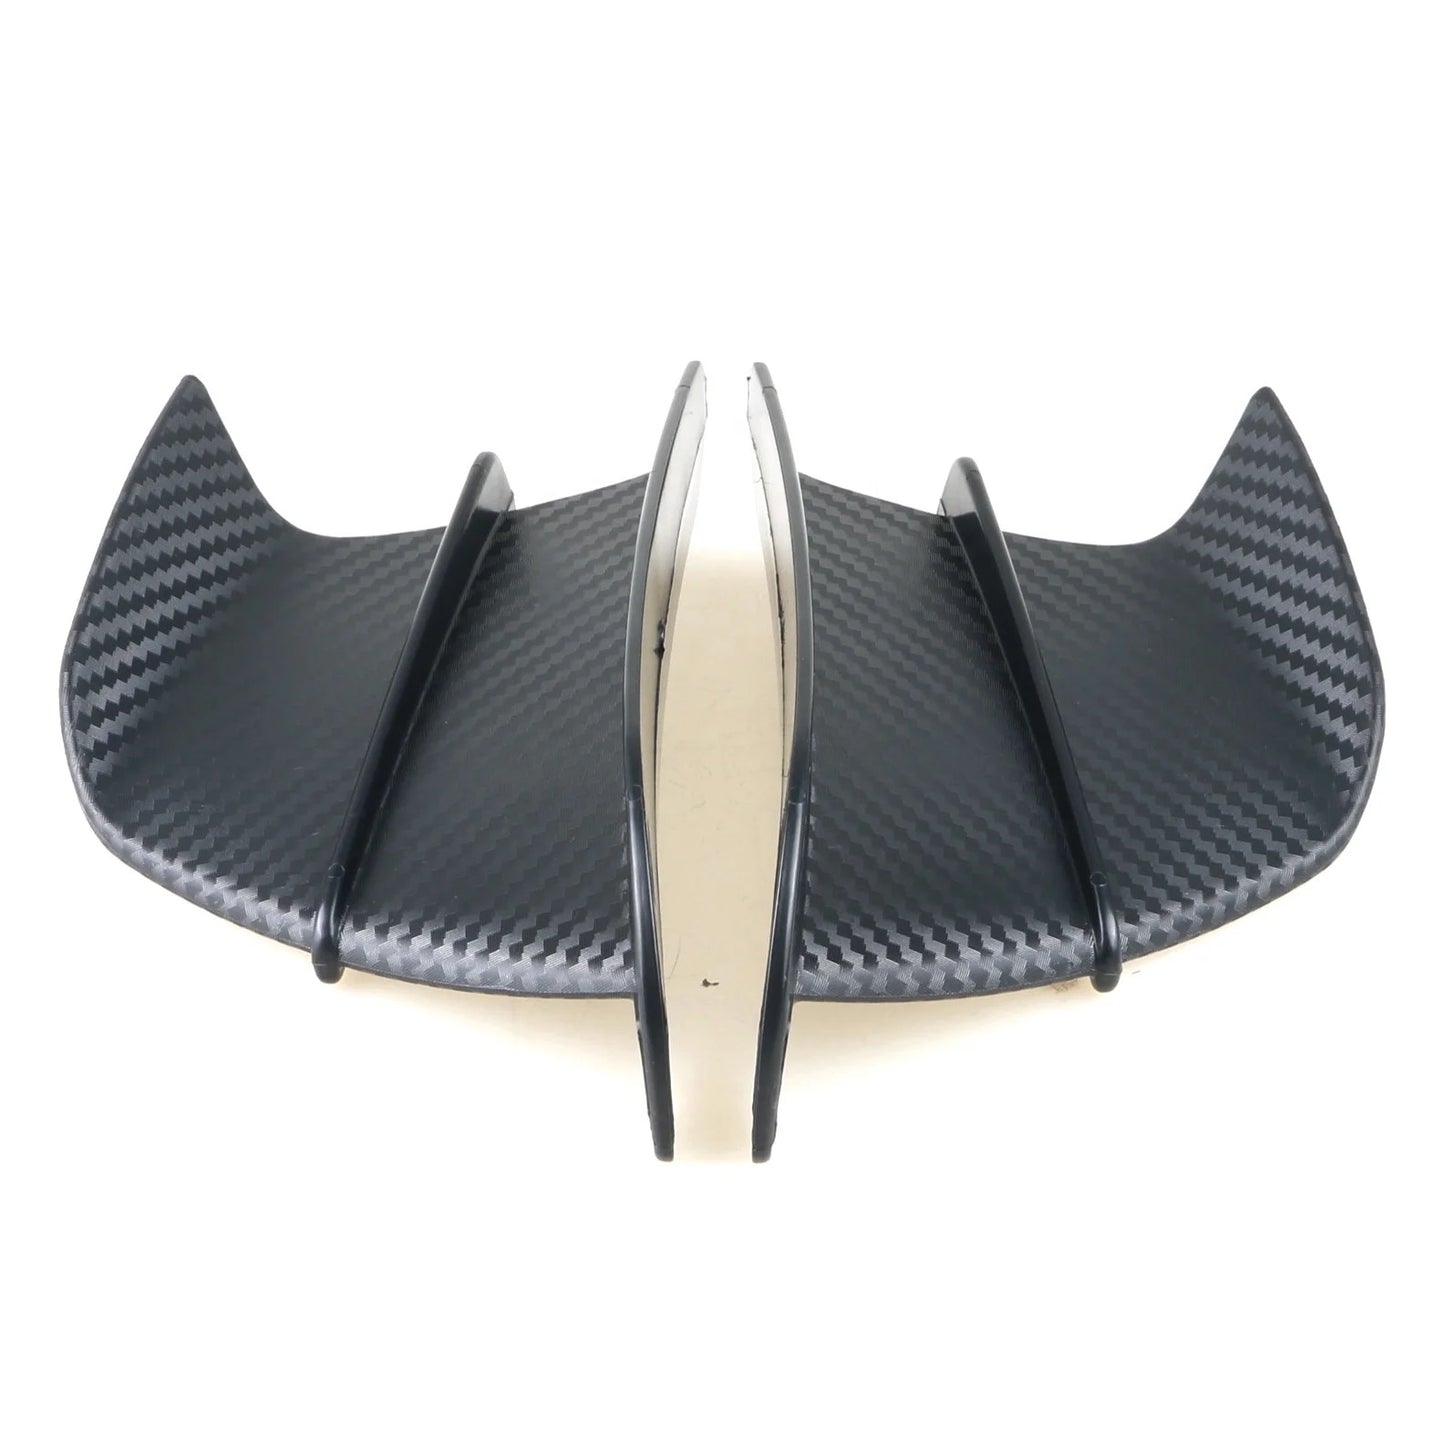 Motorcycle Modification Accessories Aerodynamic Fixed wind
Wing Kit Spoiler